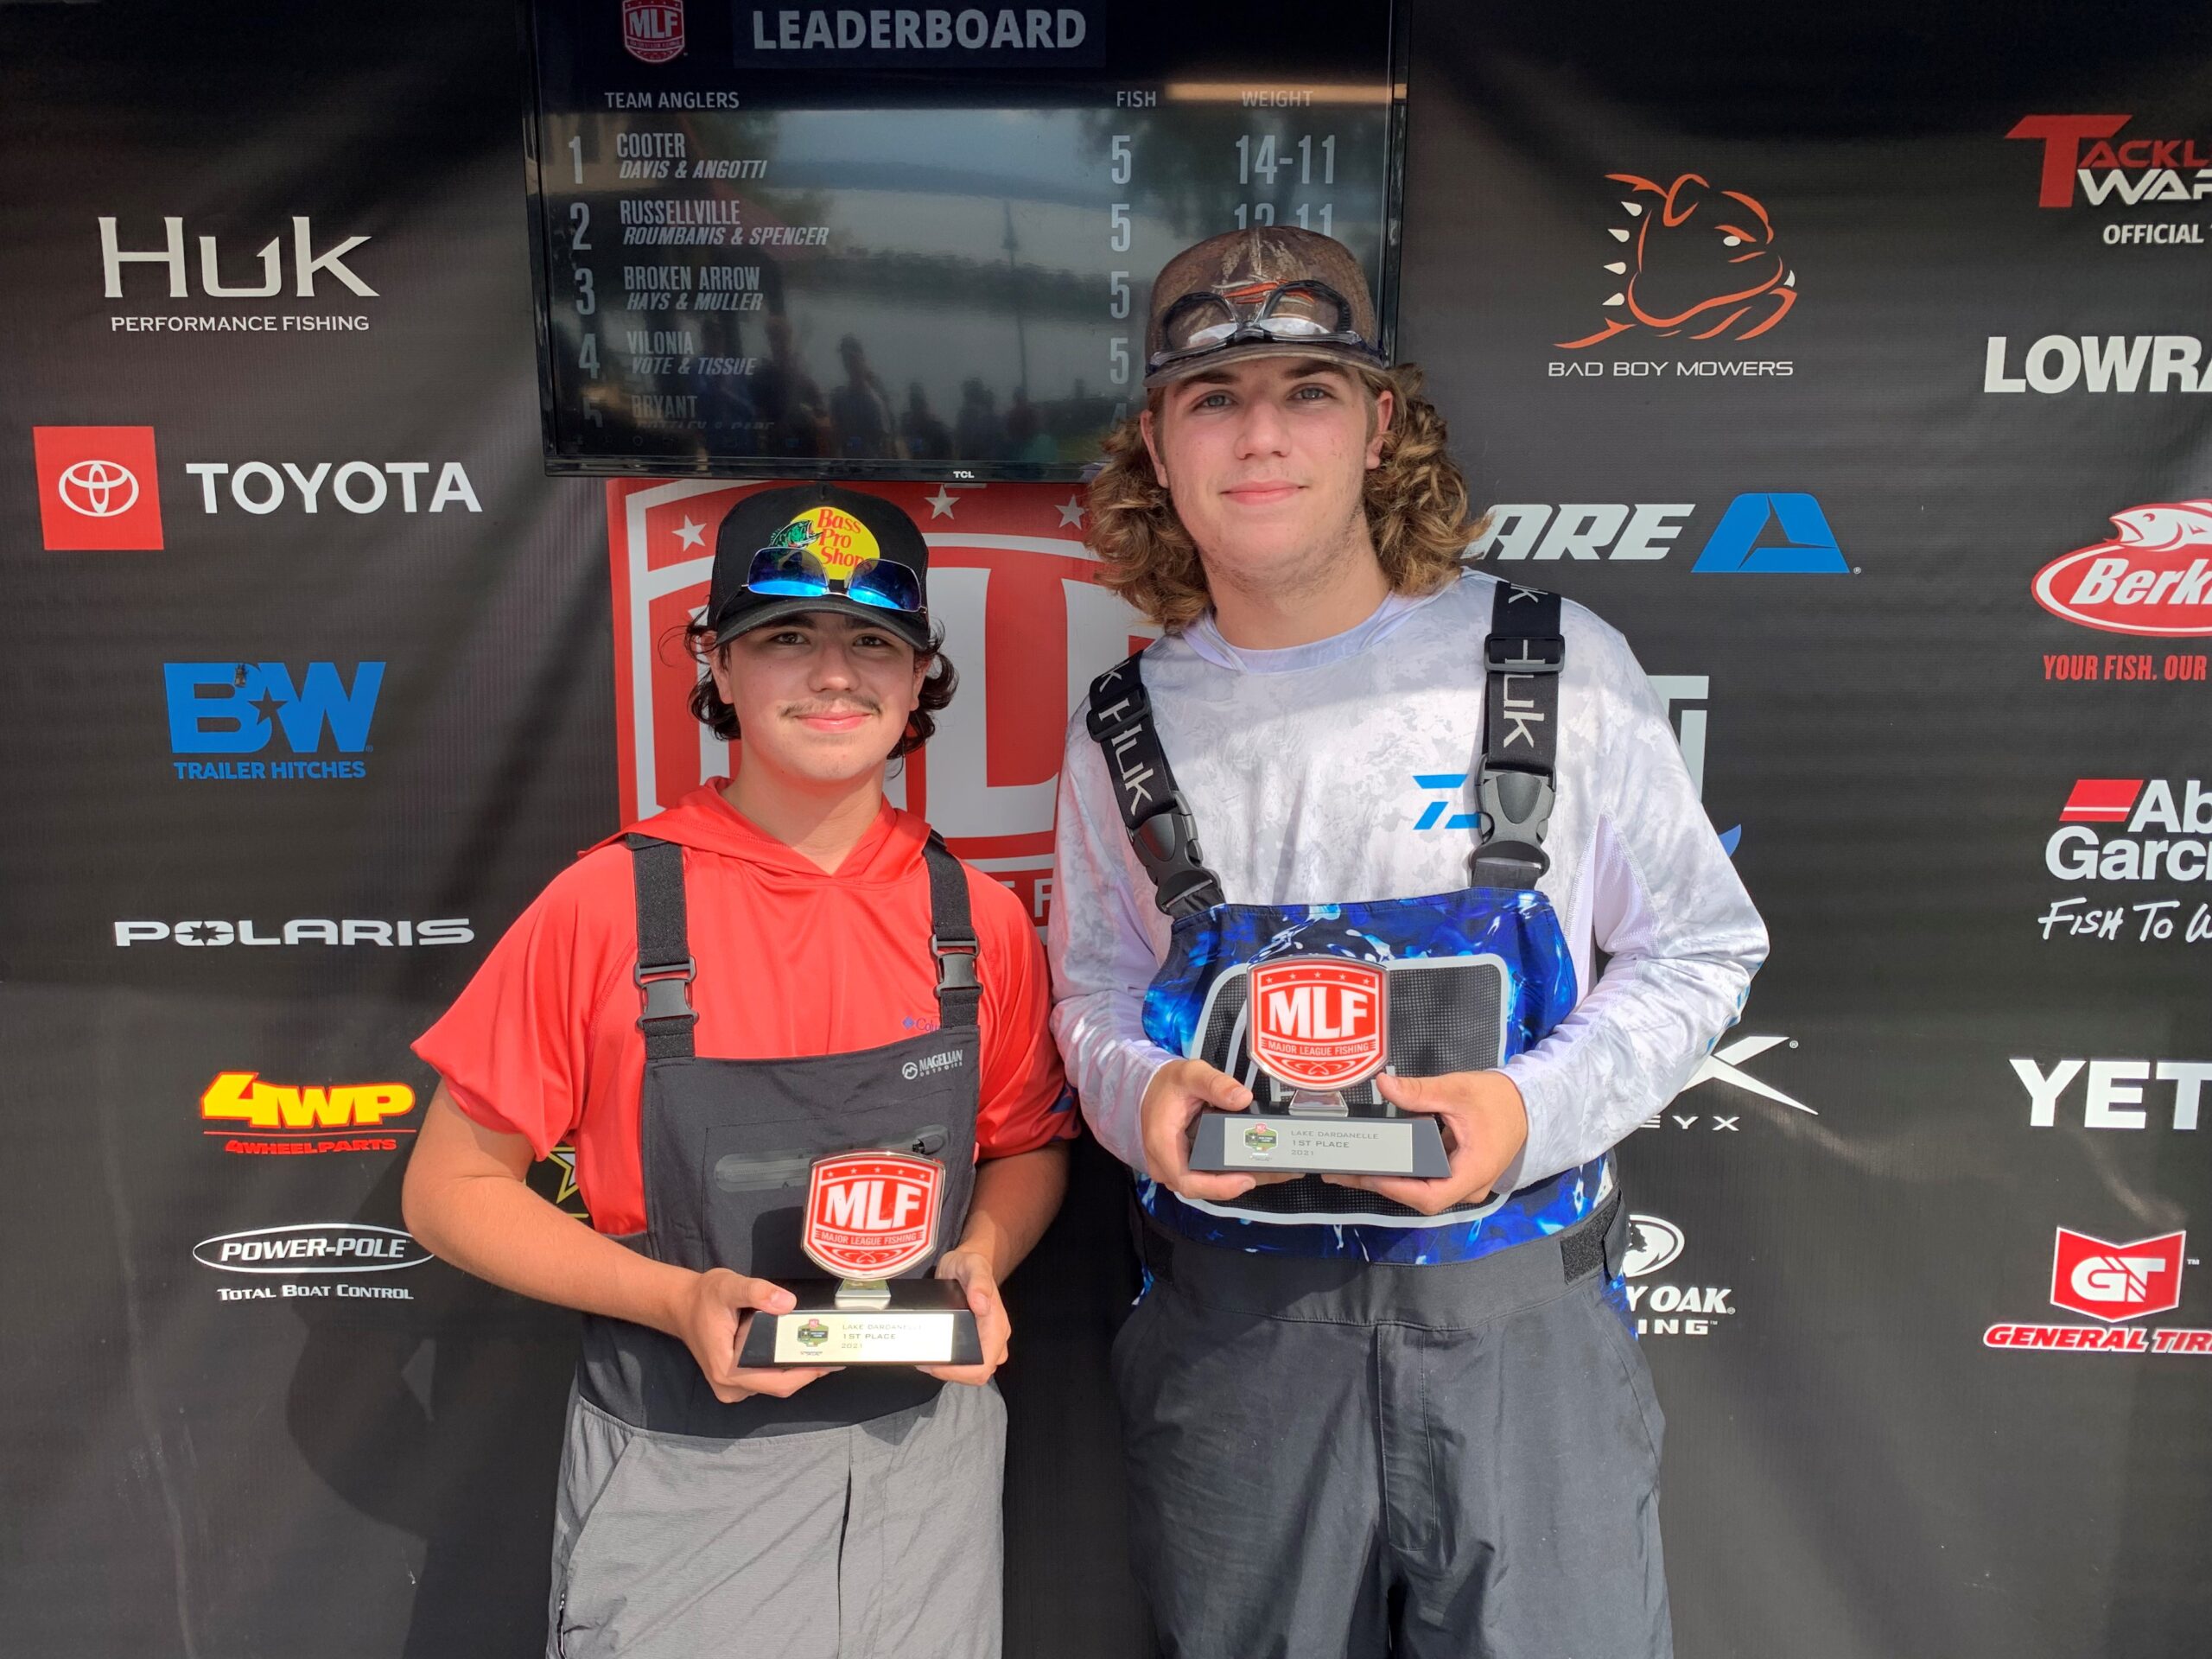 Missouri's Cooter High School Wins U.S. Army High School Fishing Open at  Lake Dardanelle Presented by Googan Baits - Major League Fishing